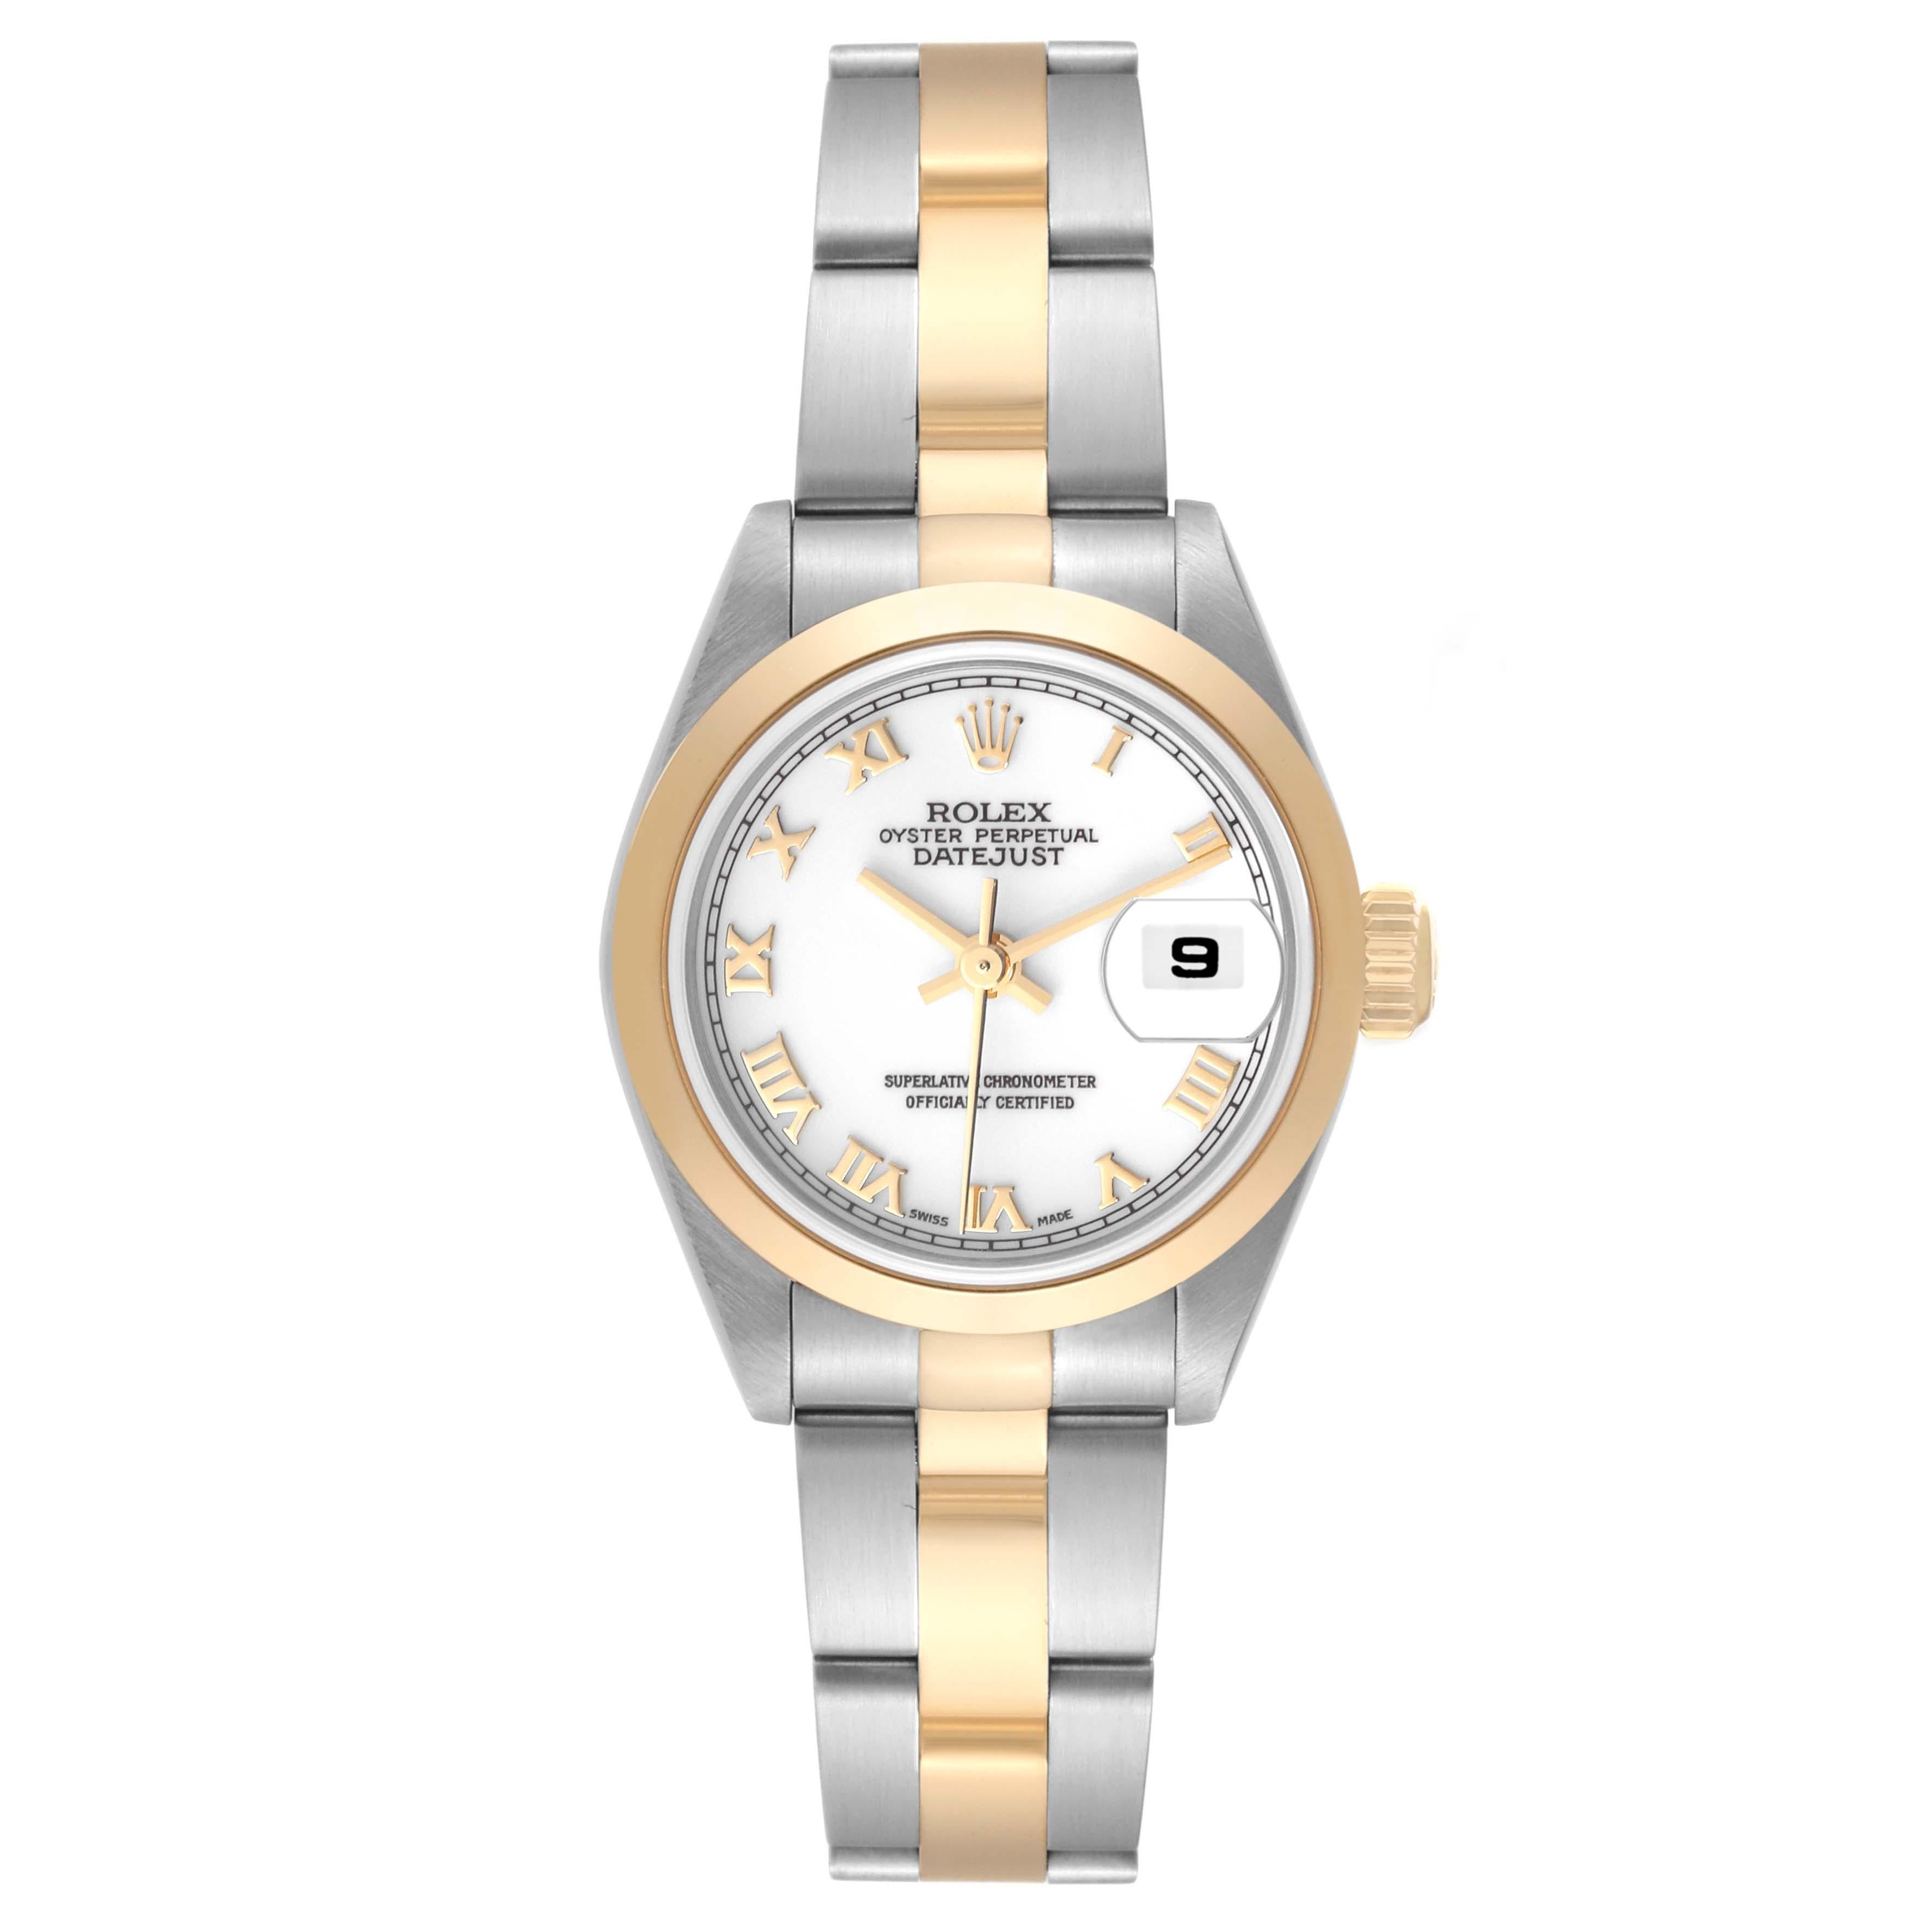 Rolex Datejust Steel Yellow Gold White Dial Ladies Watch 79163 Papers. Officially certified chronometer automatic self-winding movement. Stainless steel oyster case 26 mm in diameter. Rolex logo on an 18k yellow gold crown. 18k yellow gold smooth